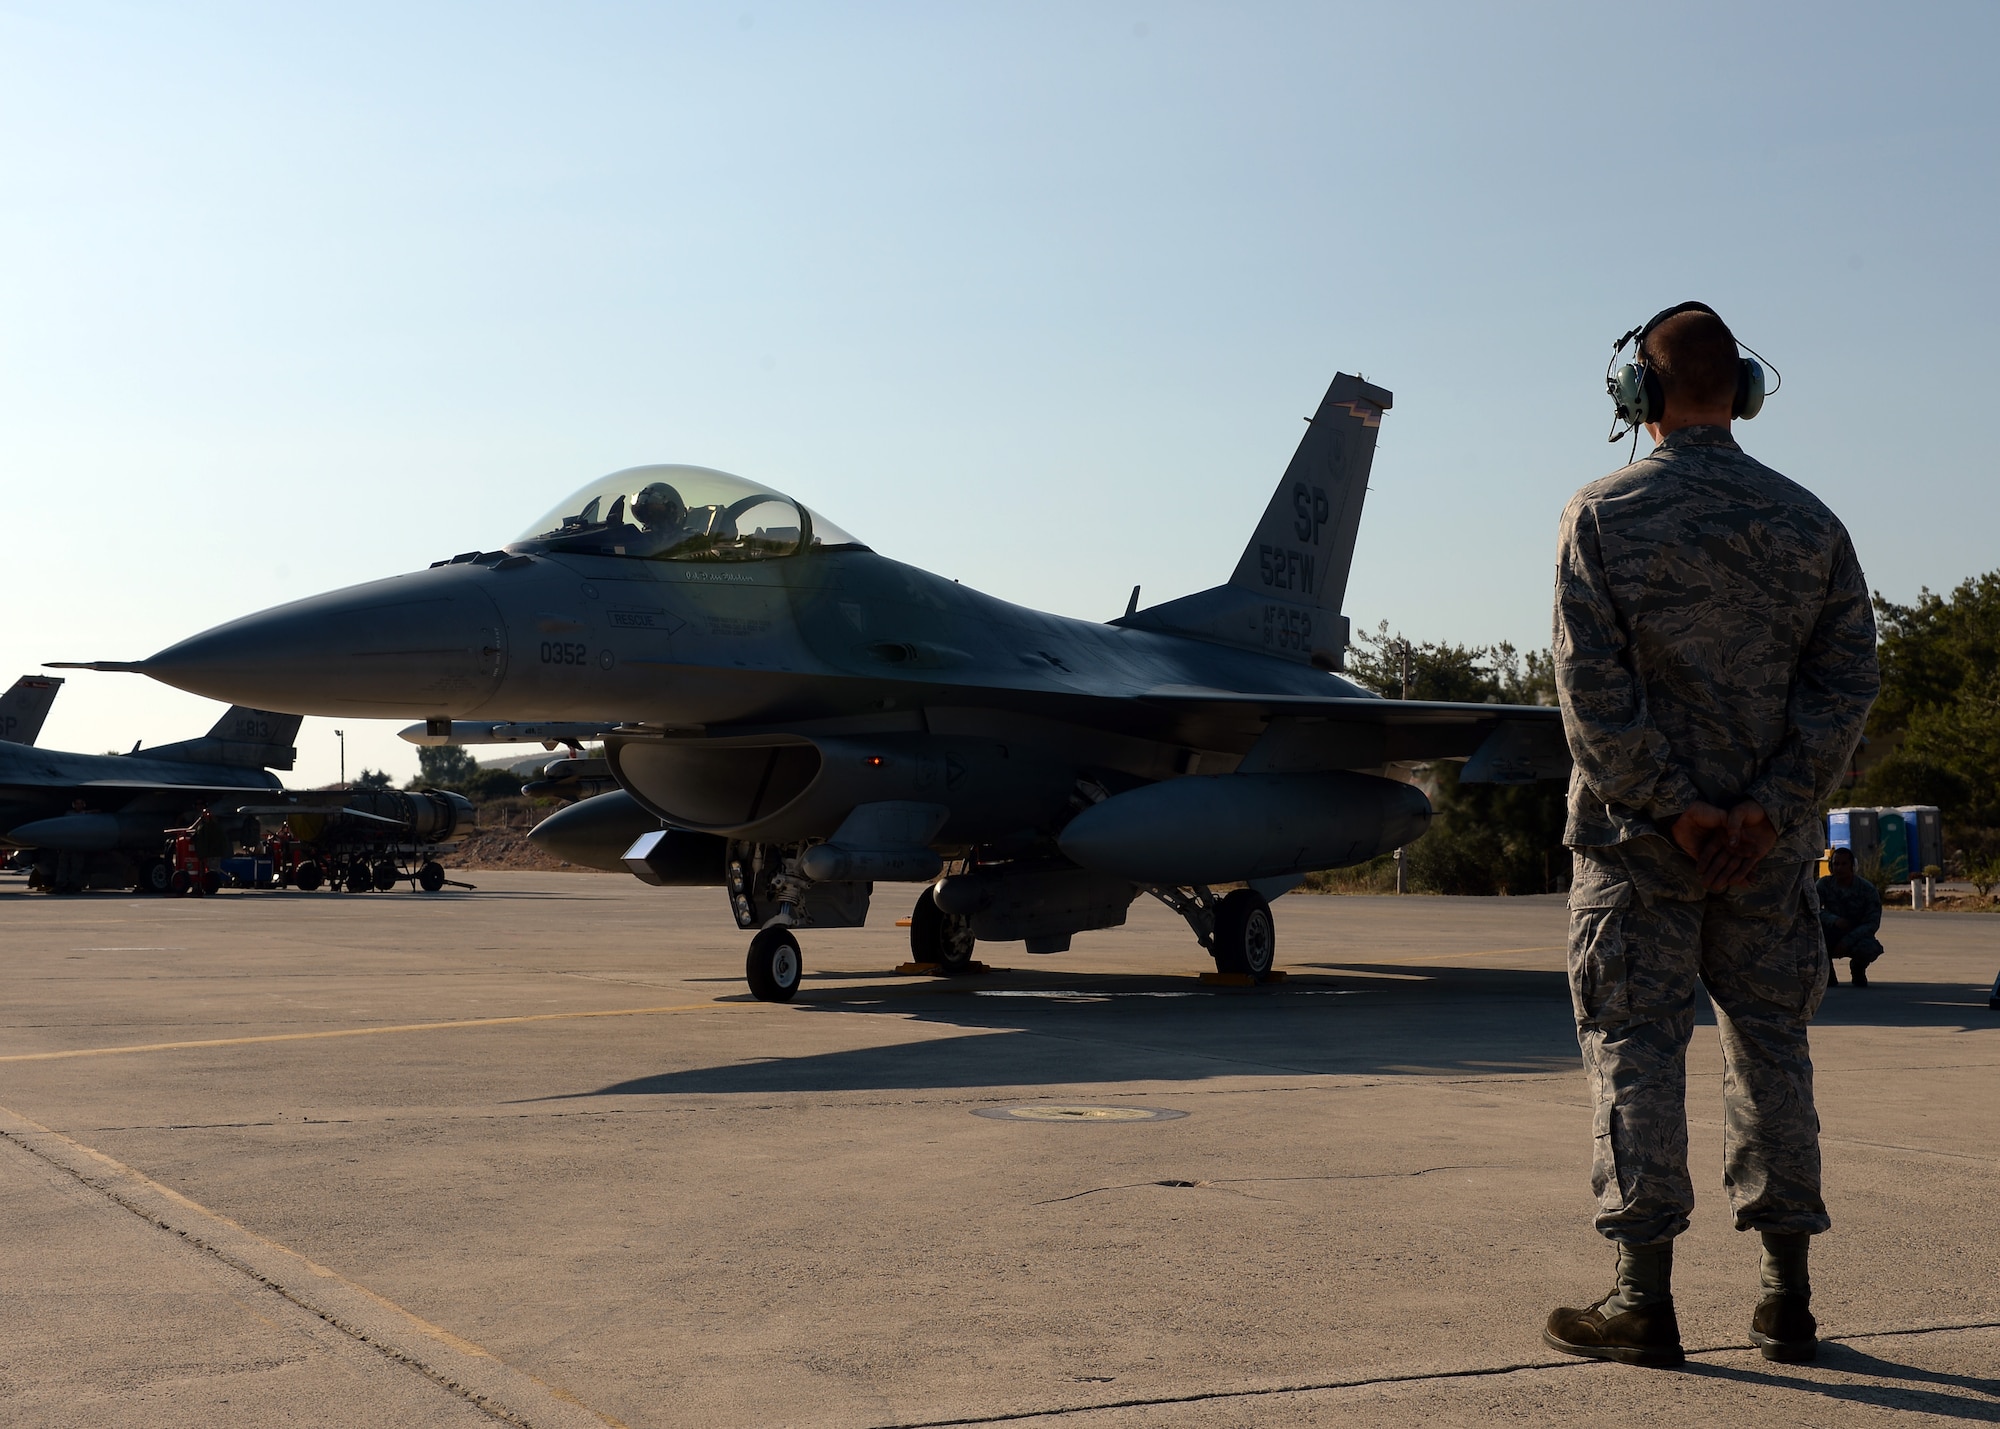 Senior Airman Alan Nelson watches an F-16 Fighting Falcon prepare for takeoff Aug. 12, 2014, during a bilateral training event in Souda Bay, Greece. The U.S. and Hellenic air forces prepare more than 20 aircraft launches a day for during the two-week bilateral training event. Nelson is with the 480th Aircraft Maintenance Unit, Spangdahlem Air Base, Germany, and is a native of Pensacola, Fla. (U.S. Air Force photo/Staff Sgt. Daryl Knee)